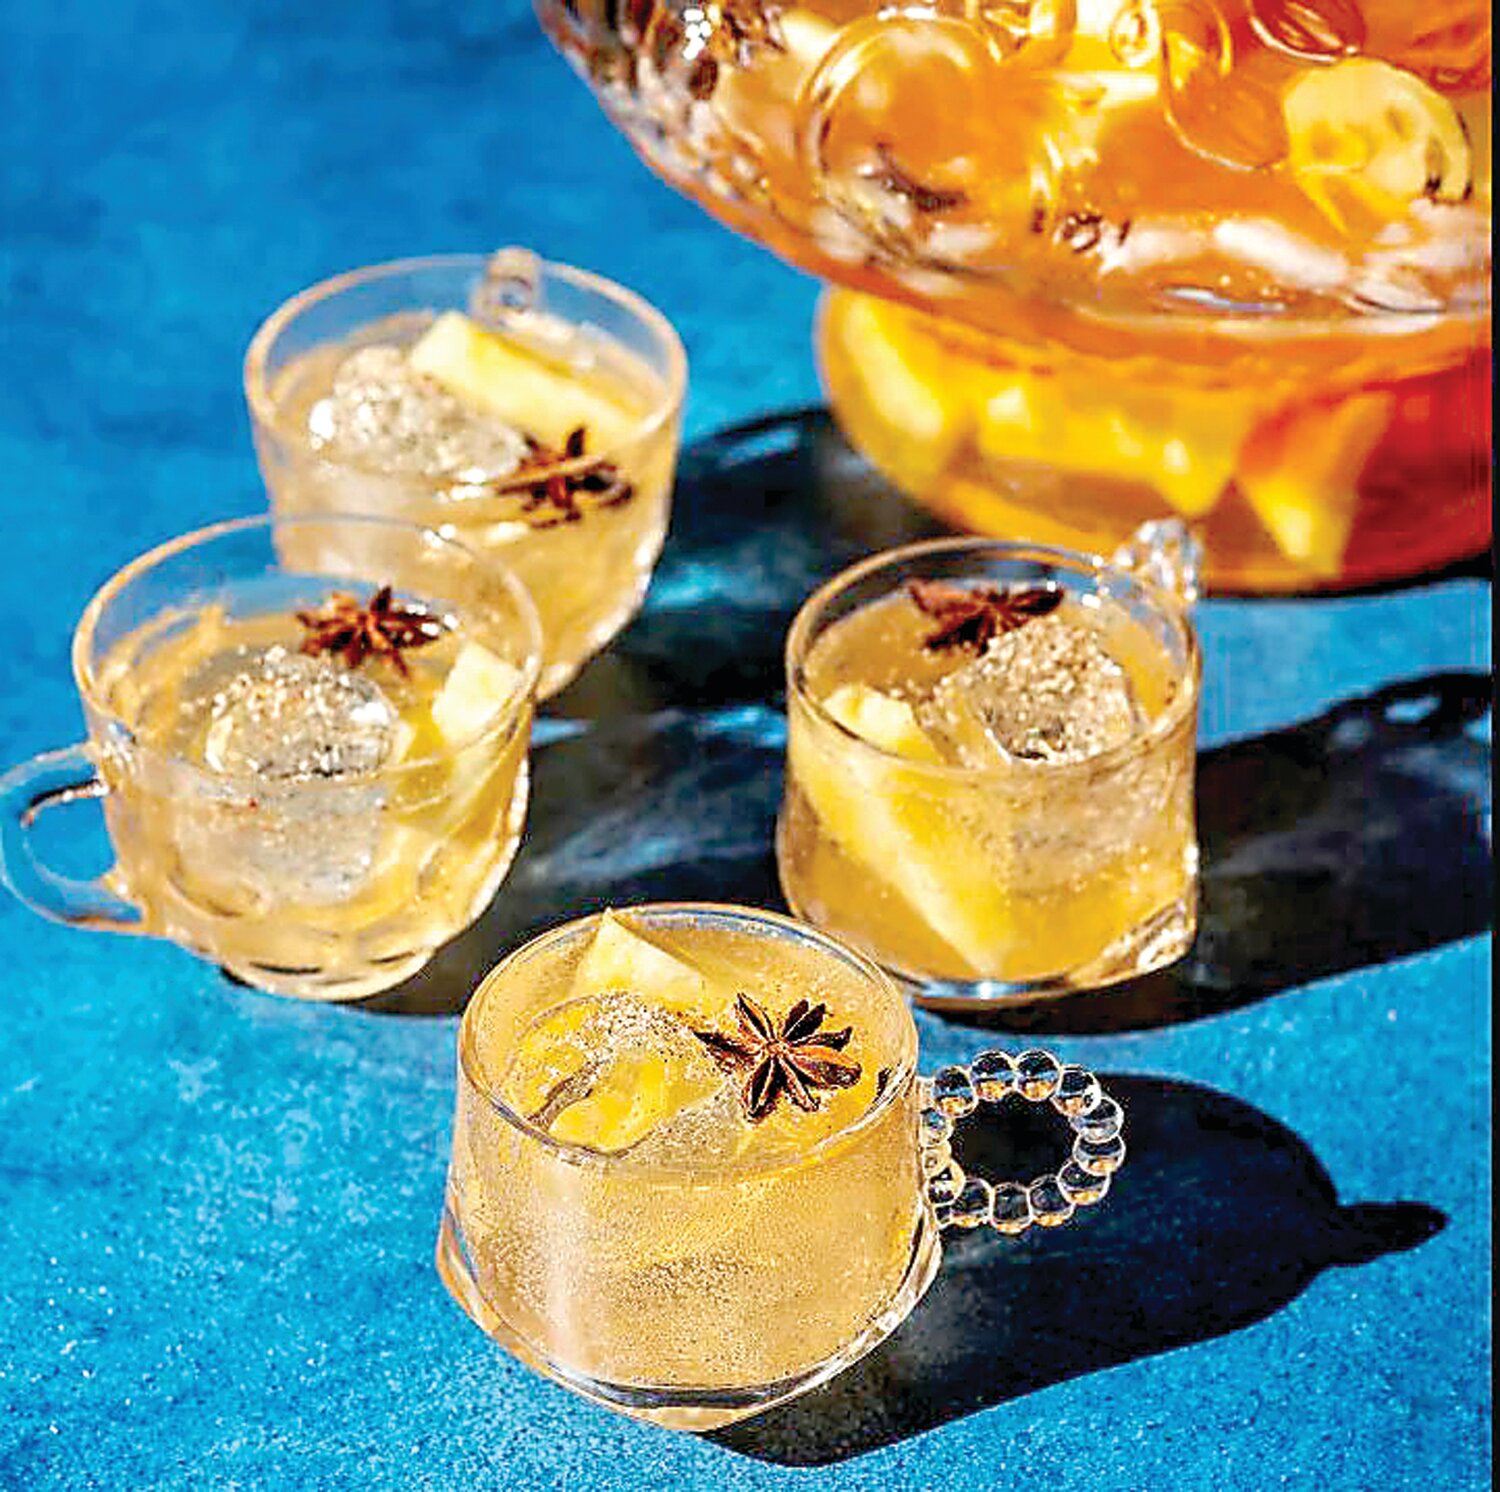 Champagne punch is an option for toasting the new year on Sunday night.